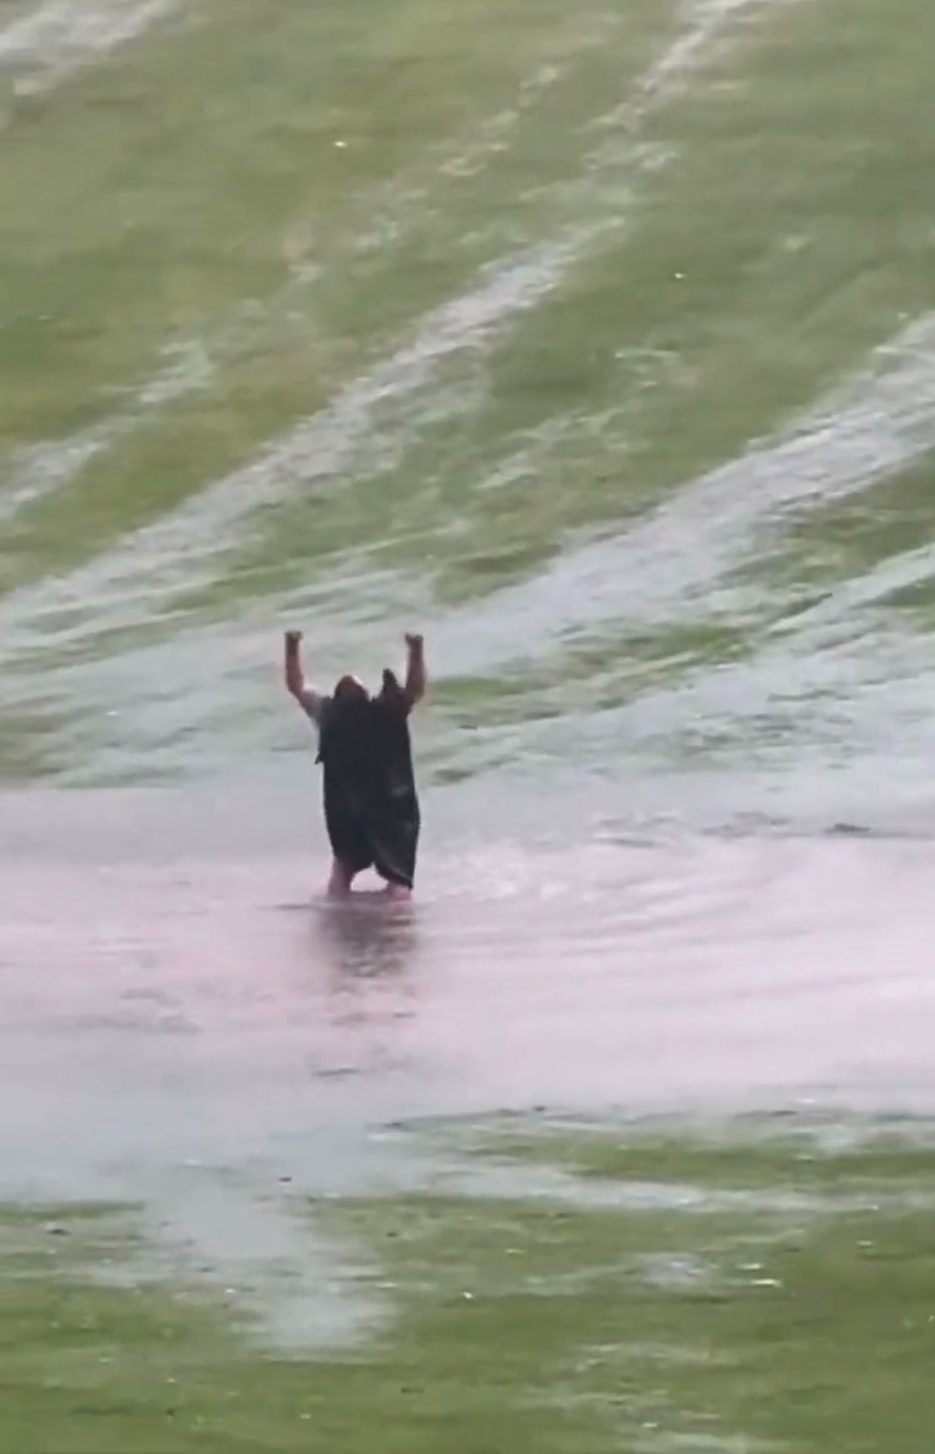 Watch: A wild rain storm turned this Ohio golf course into a huge waterslide